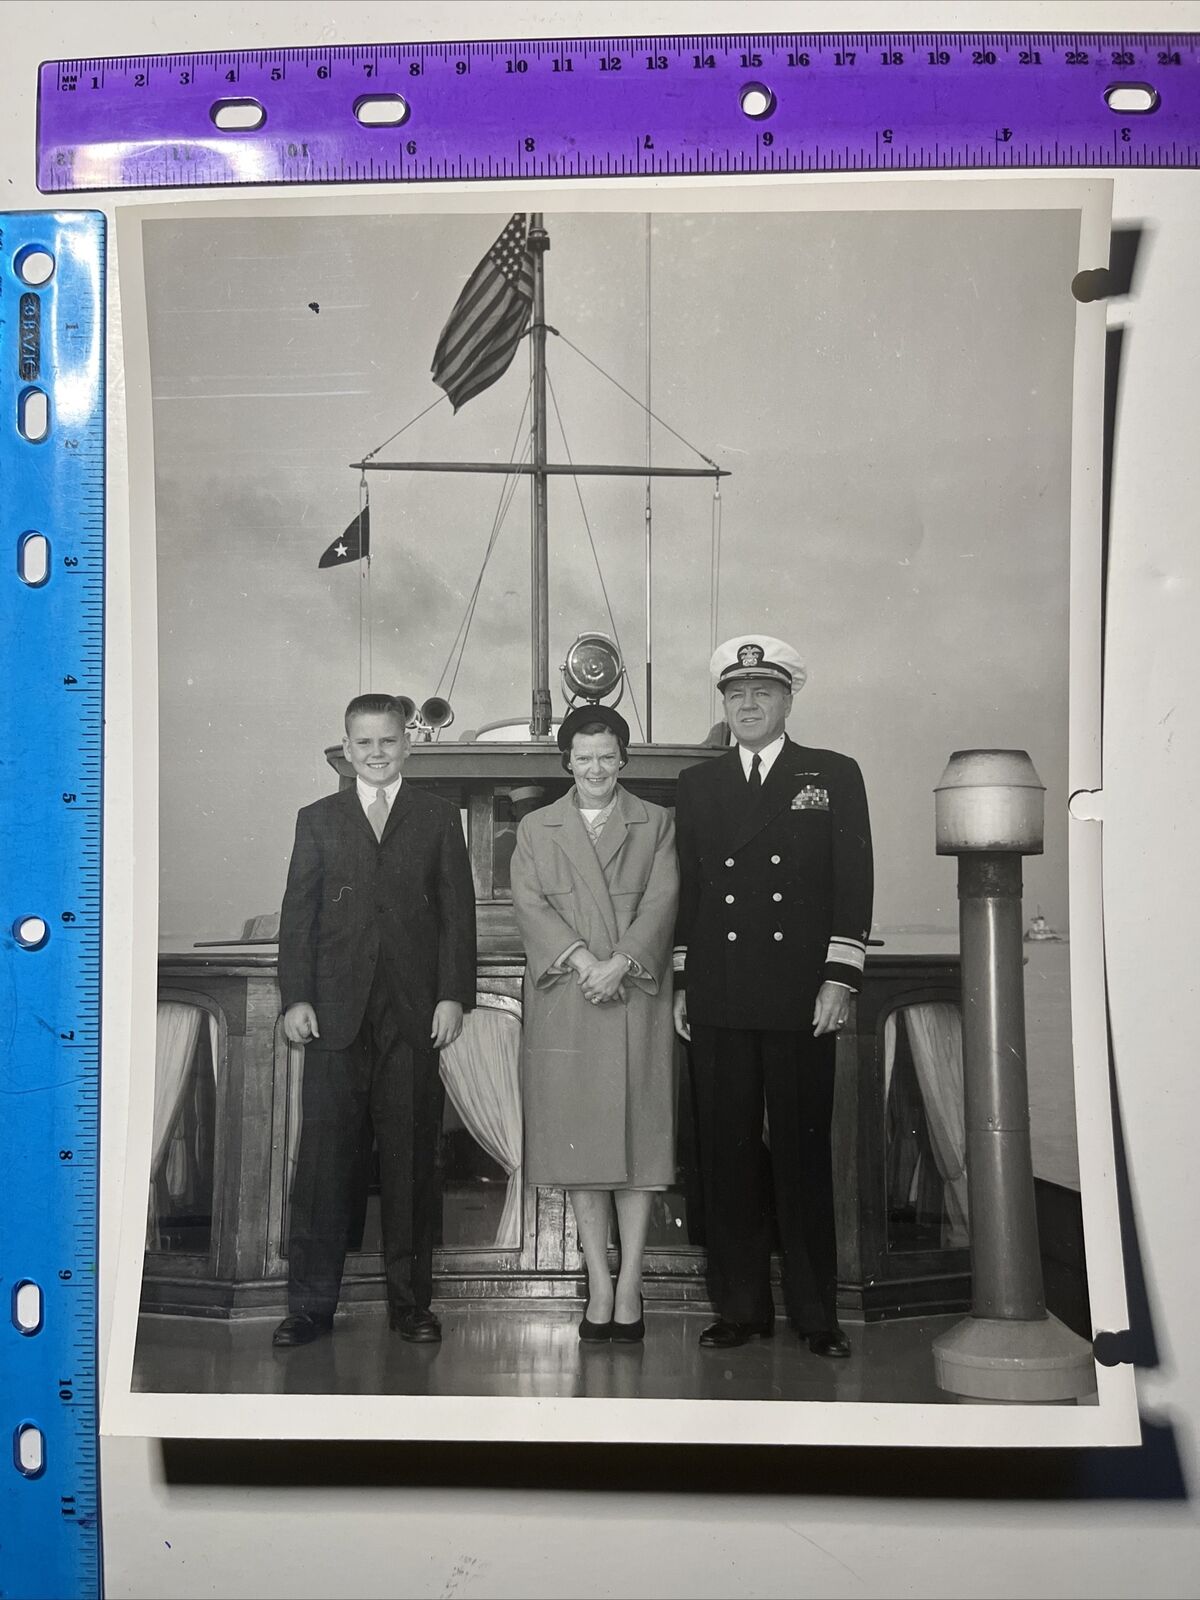 USN NAVY ADMIRAL McLEAN with WIFE & SON Ship Photo Boat Vintage B&W 8x10 FLAGS